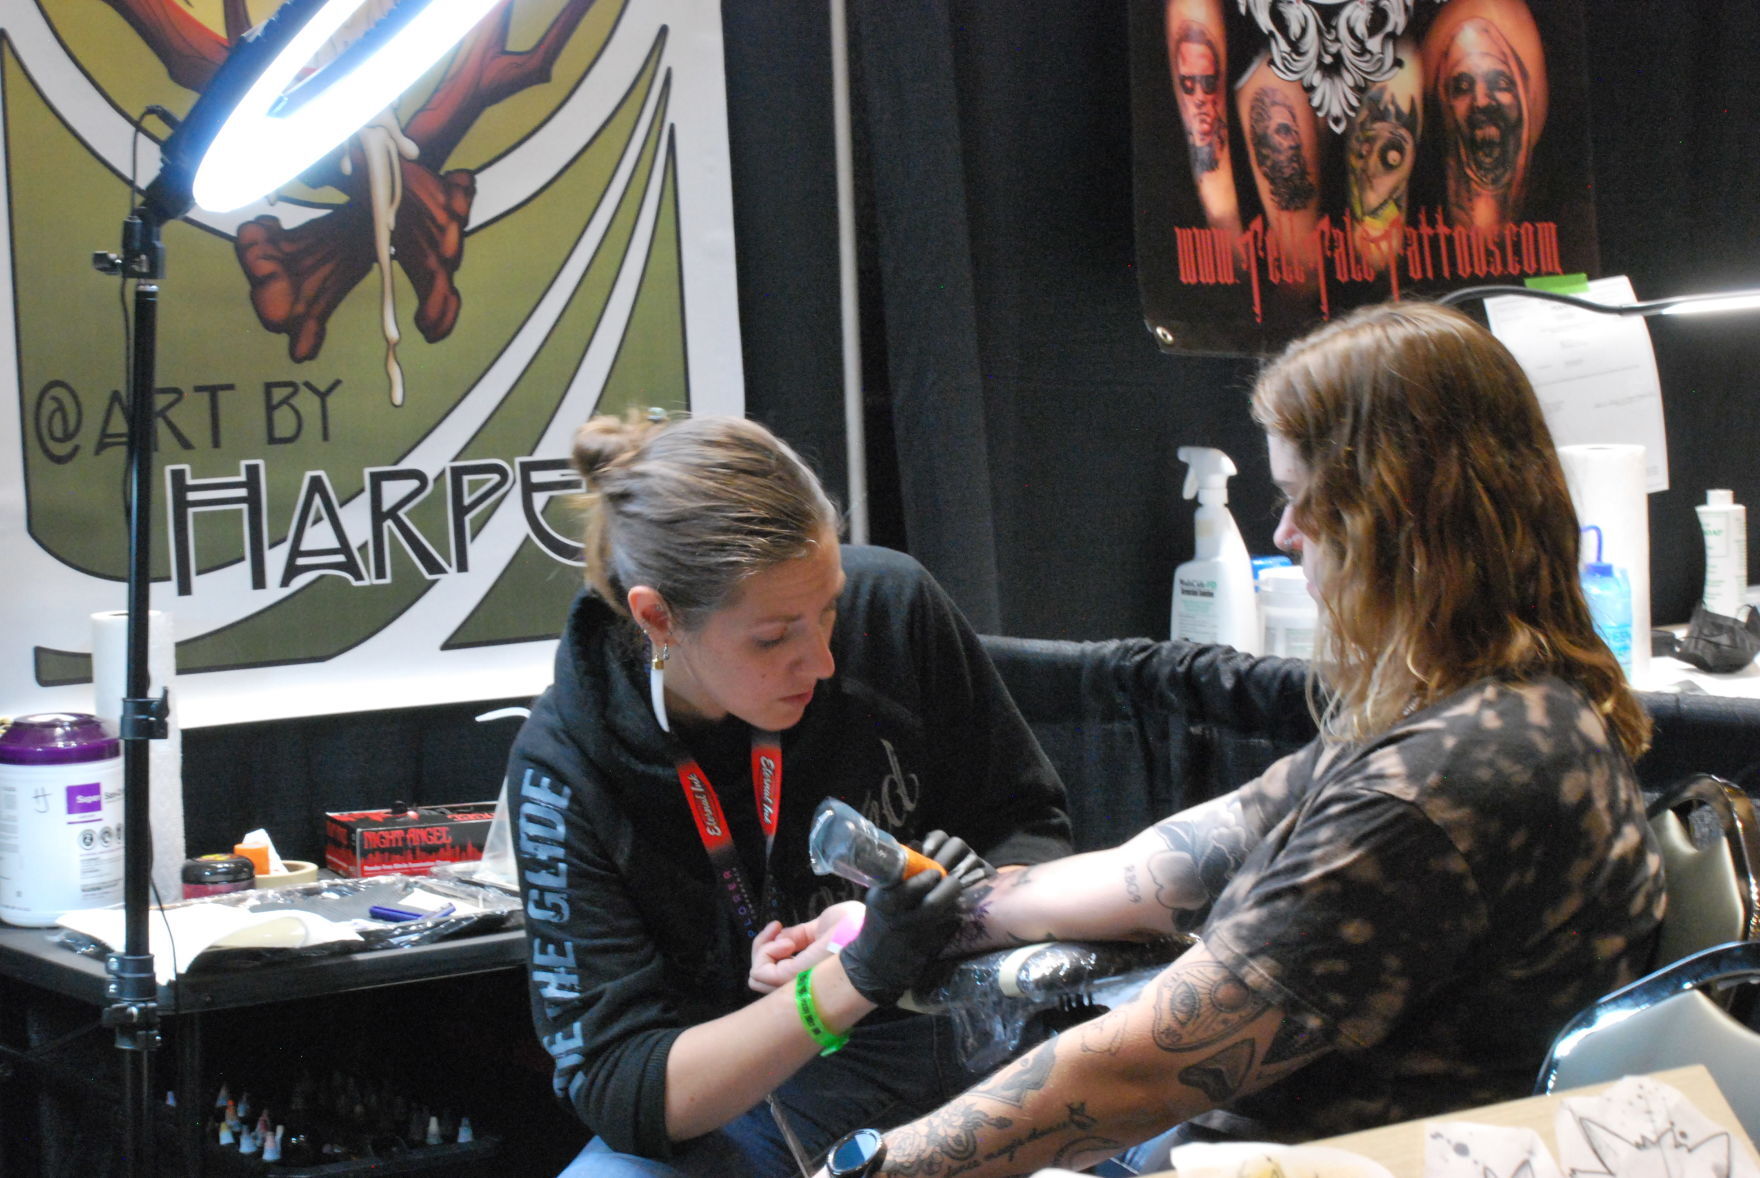 Tattoo festival brings national artists to Fort Wayne